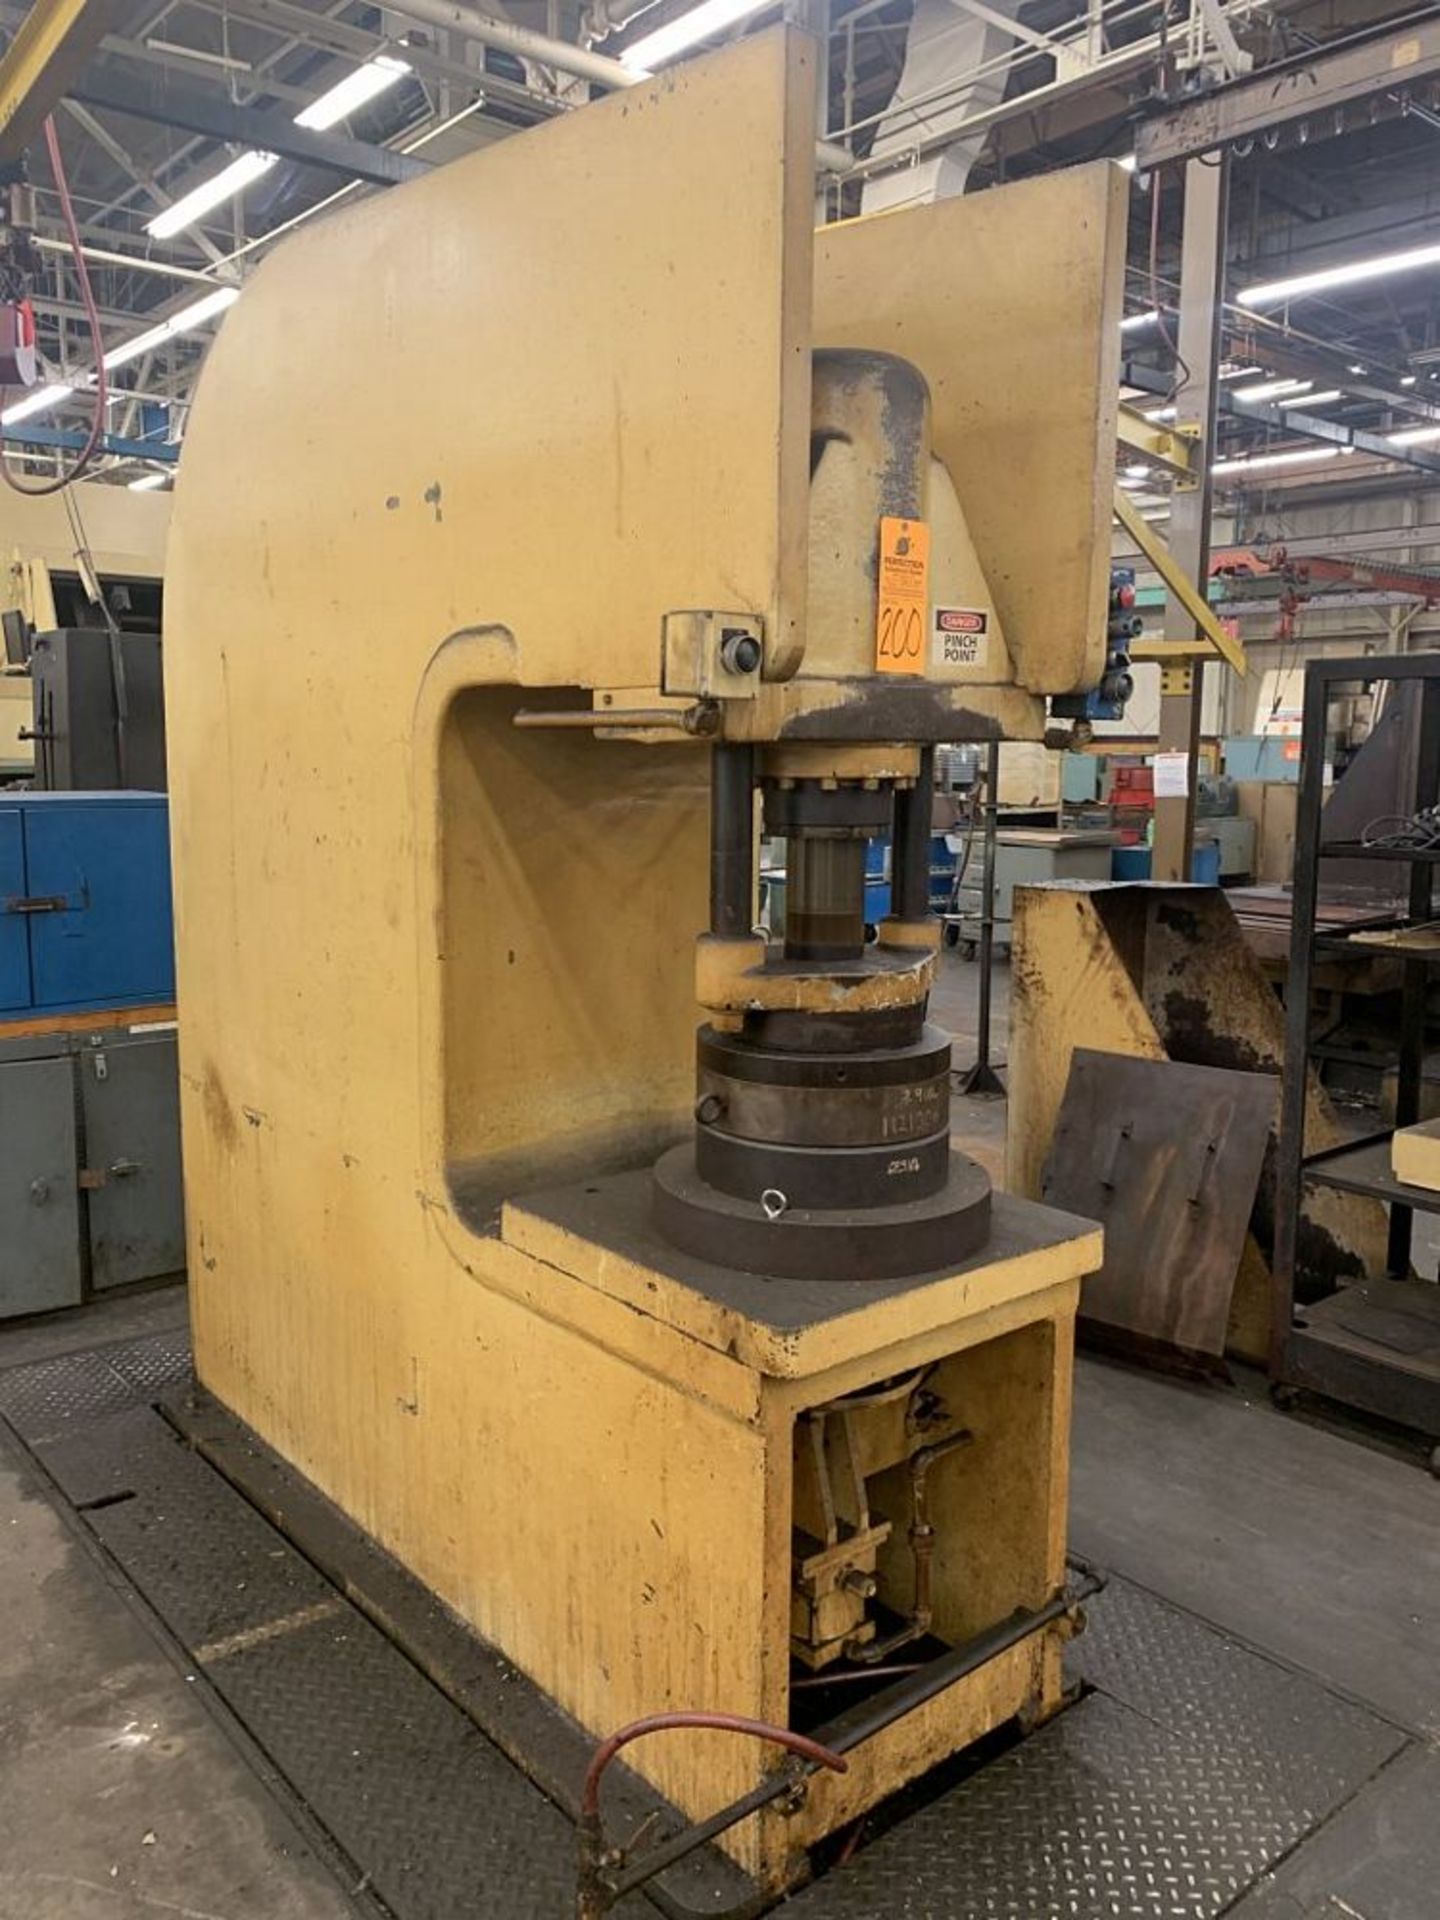 100 Ton HANNIFIN 100-Ton Hydraulic Press, s/n D-9576, 28" x 28" Bed, 24" Throat | M12540 - Image 2 of 3